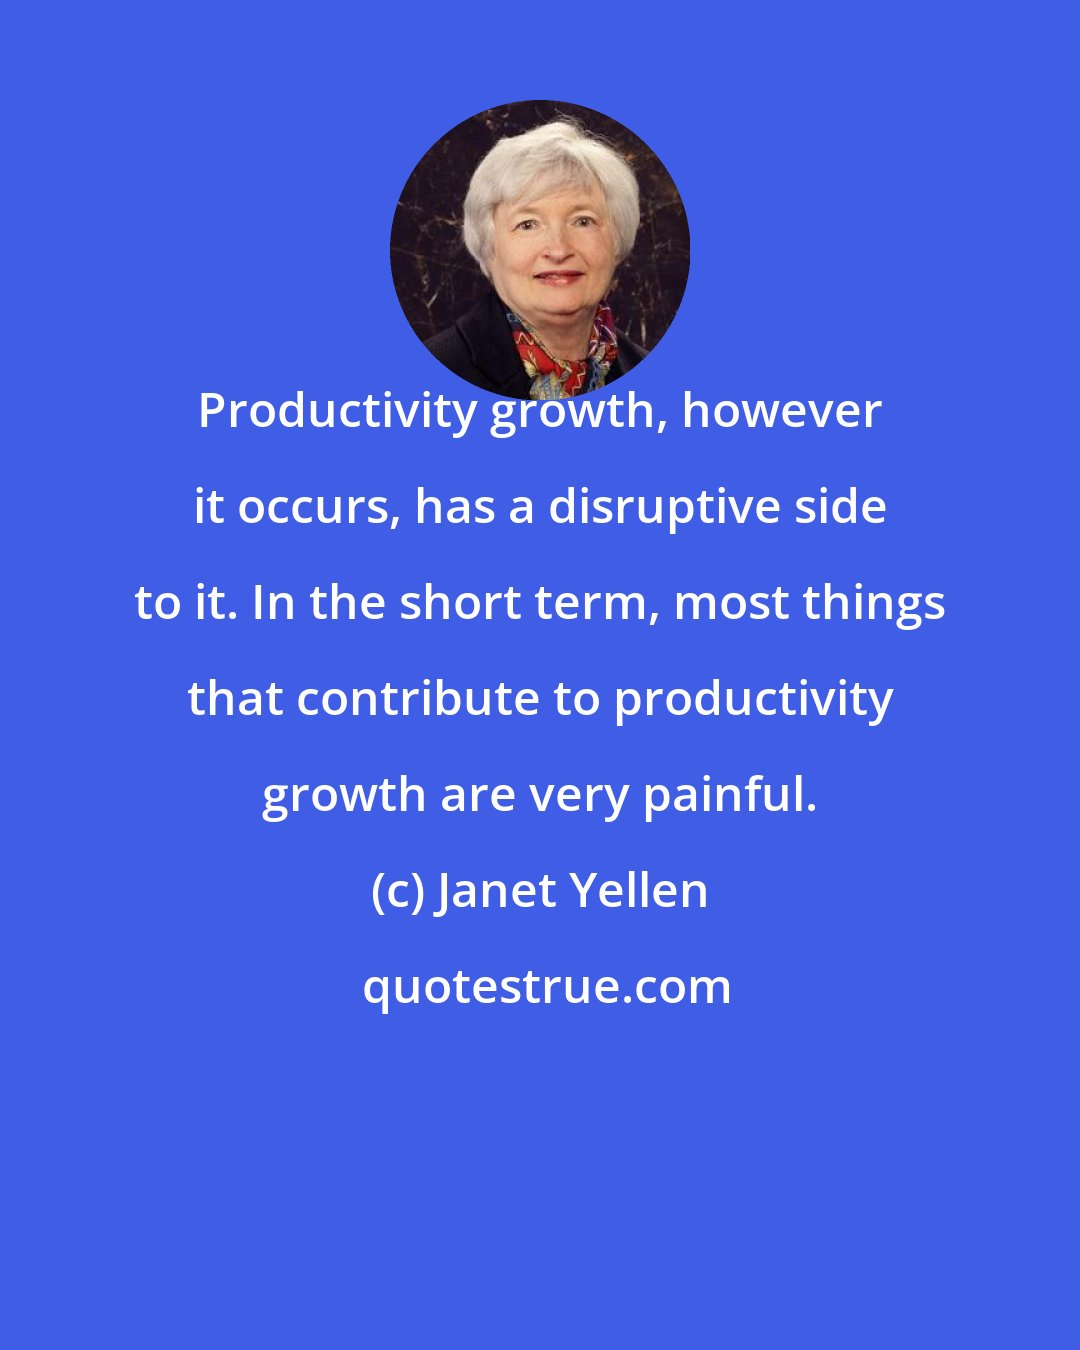 Janet Yellen: Productivity growth, however it occurs, has a disruptive side to it. In the short term, most things that contribute to productivity growth are very painful.